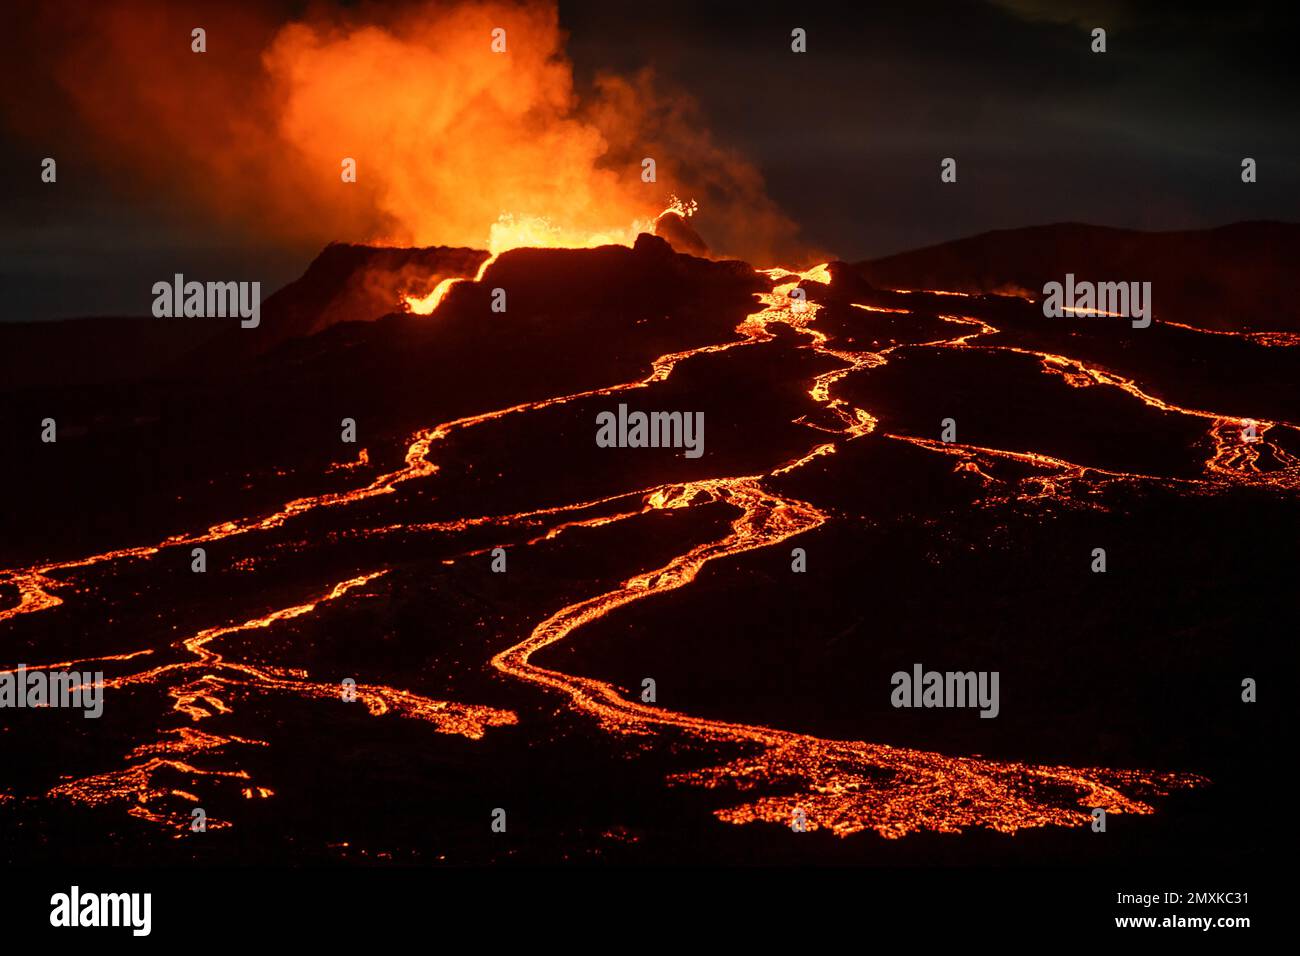 Lava spurting out of crater and reddish illuminated smoke cloud, lava flows, erupting volcano, Fagradalsfjall table volcano, Krýsuvík volcano system, Stock Photo